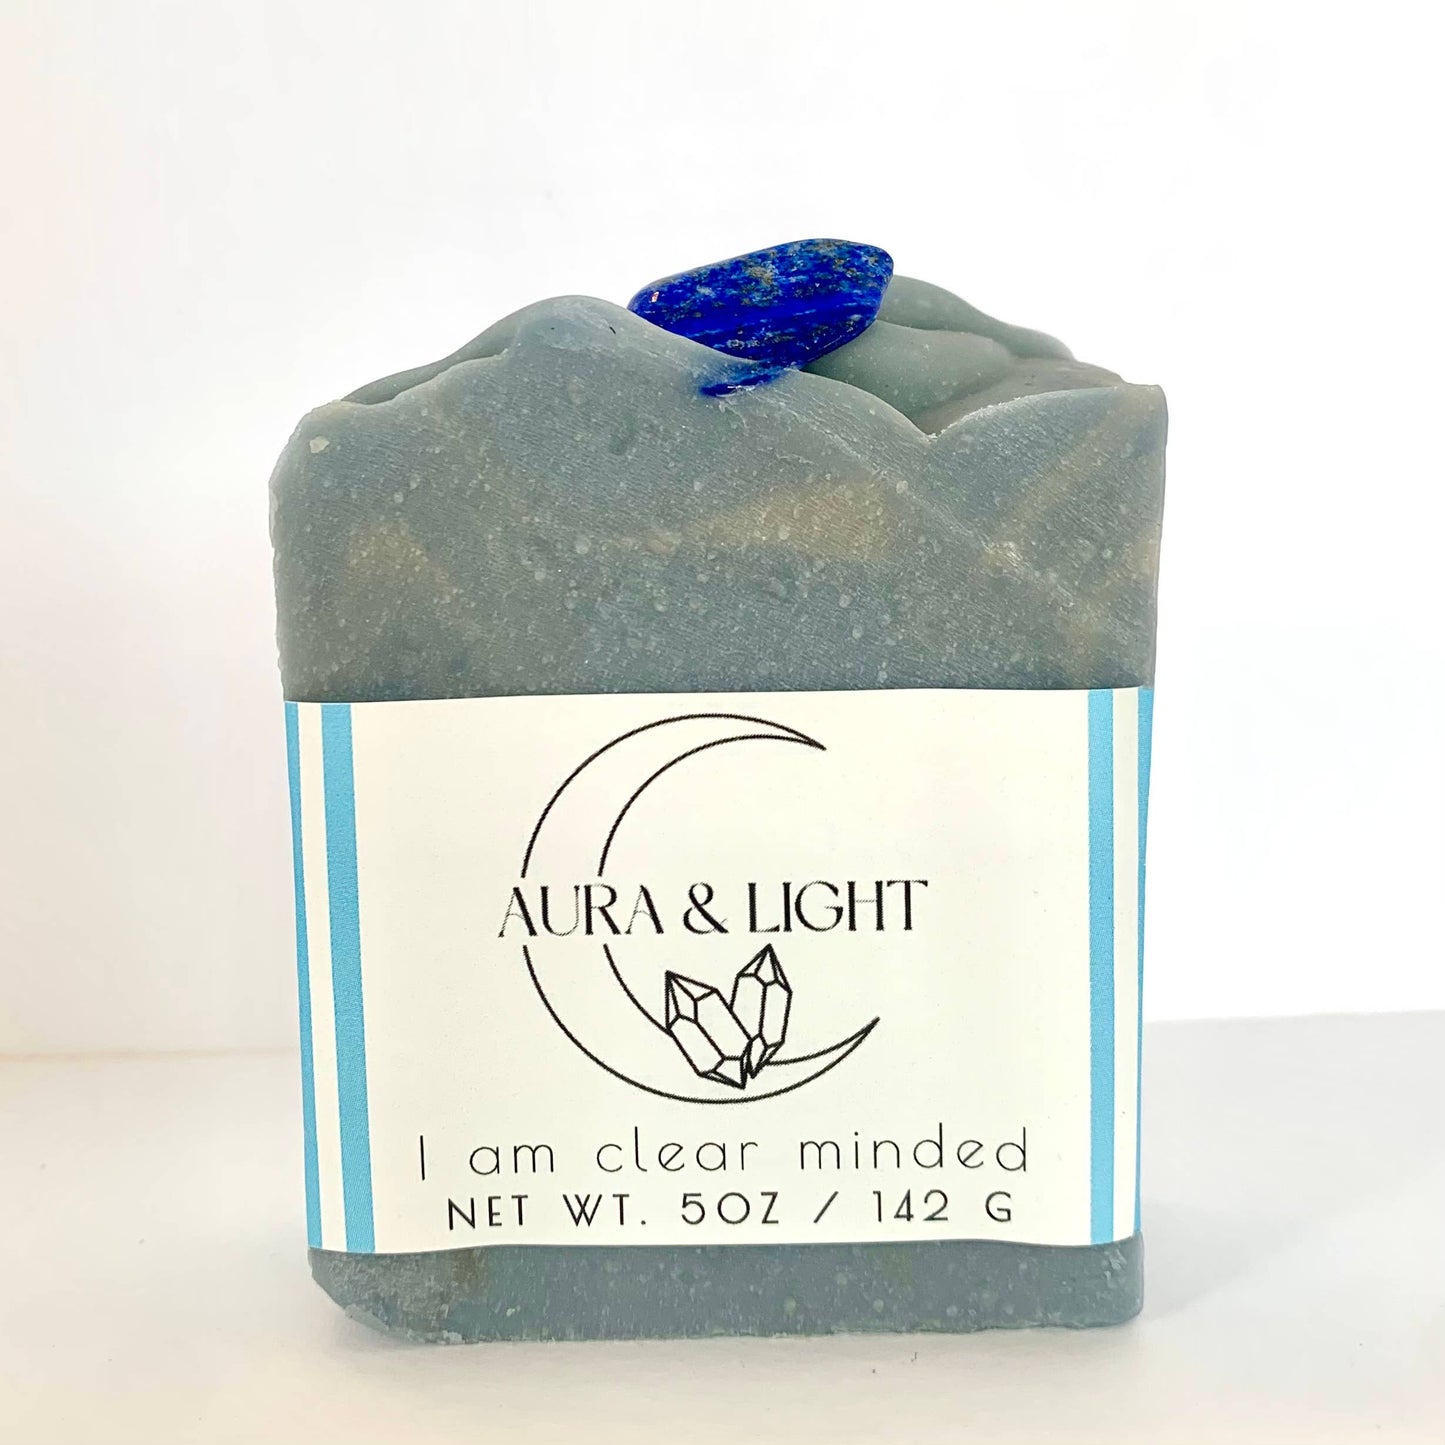 I am clear minded - Aura & Light Crystal Soap - Pluff Mud Mercantile